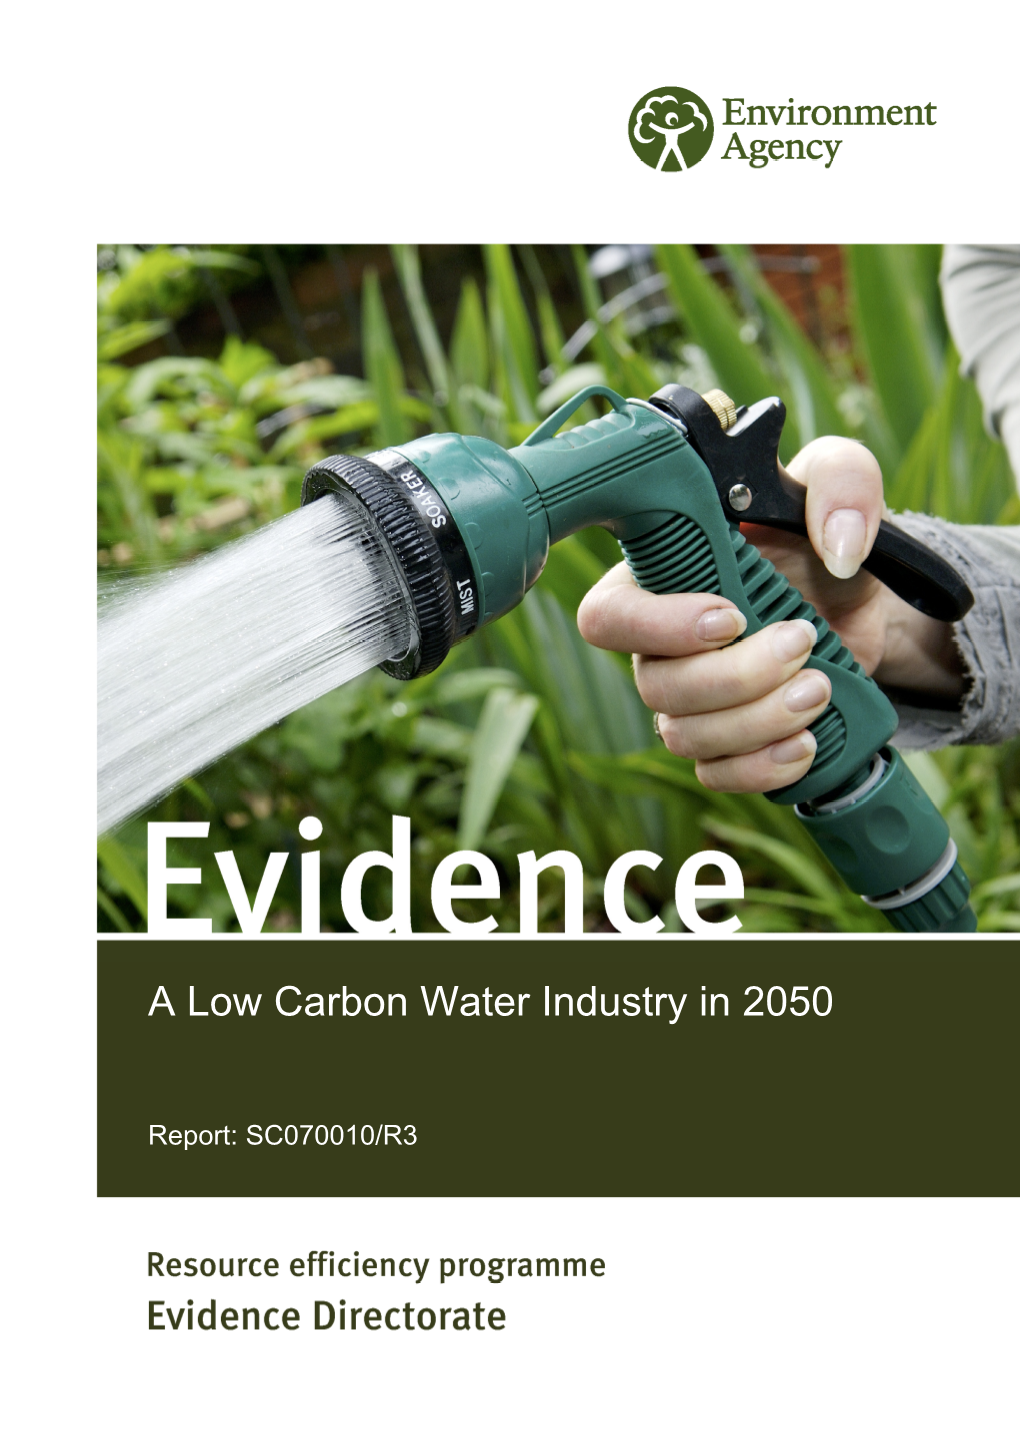 A Low Carbon Water Industry in 2050